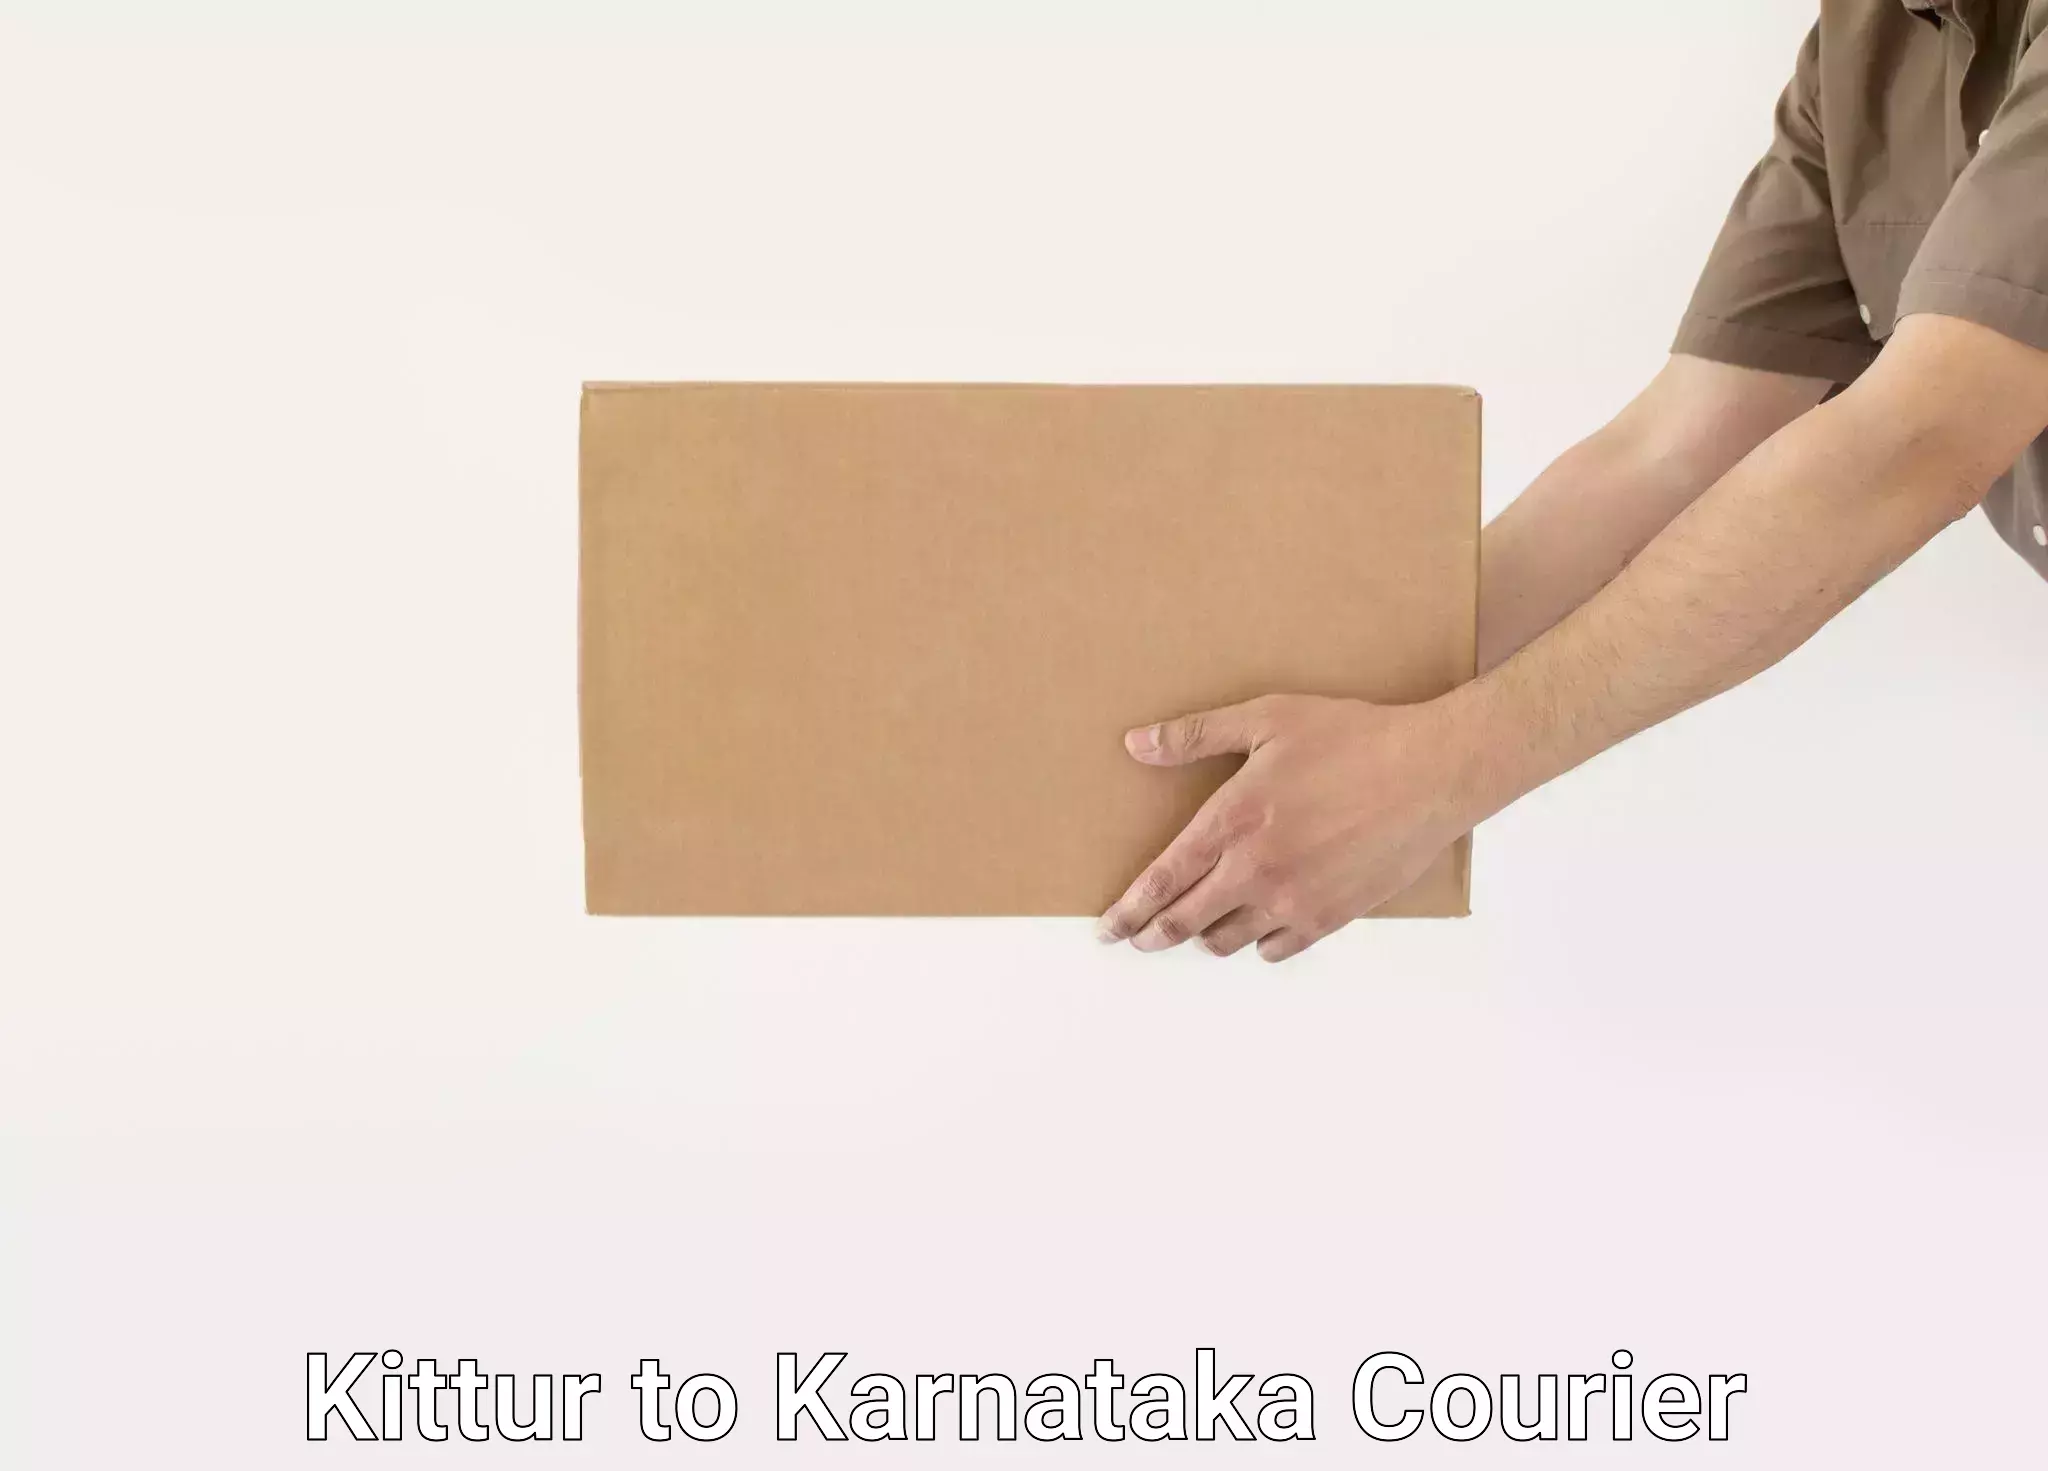 Quality furniture relocation Kittur to Dharwad